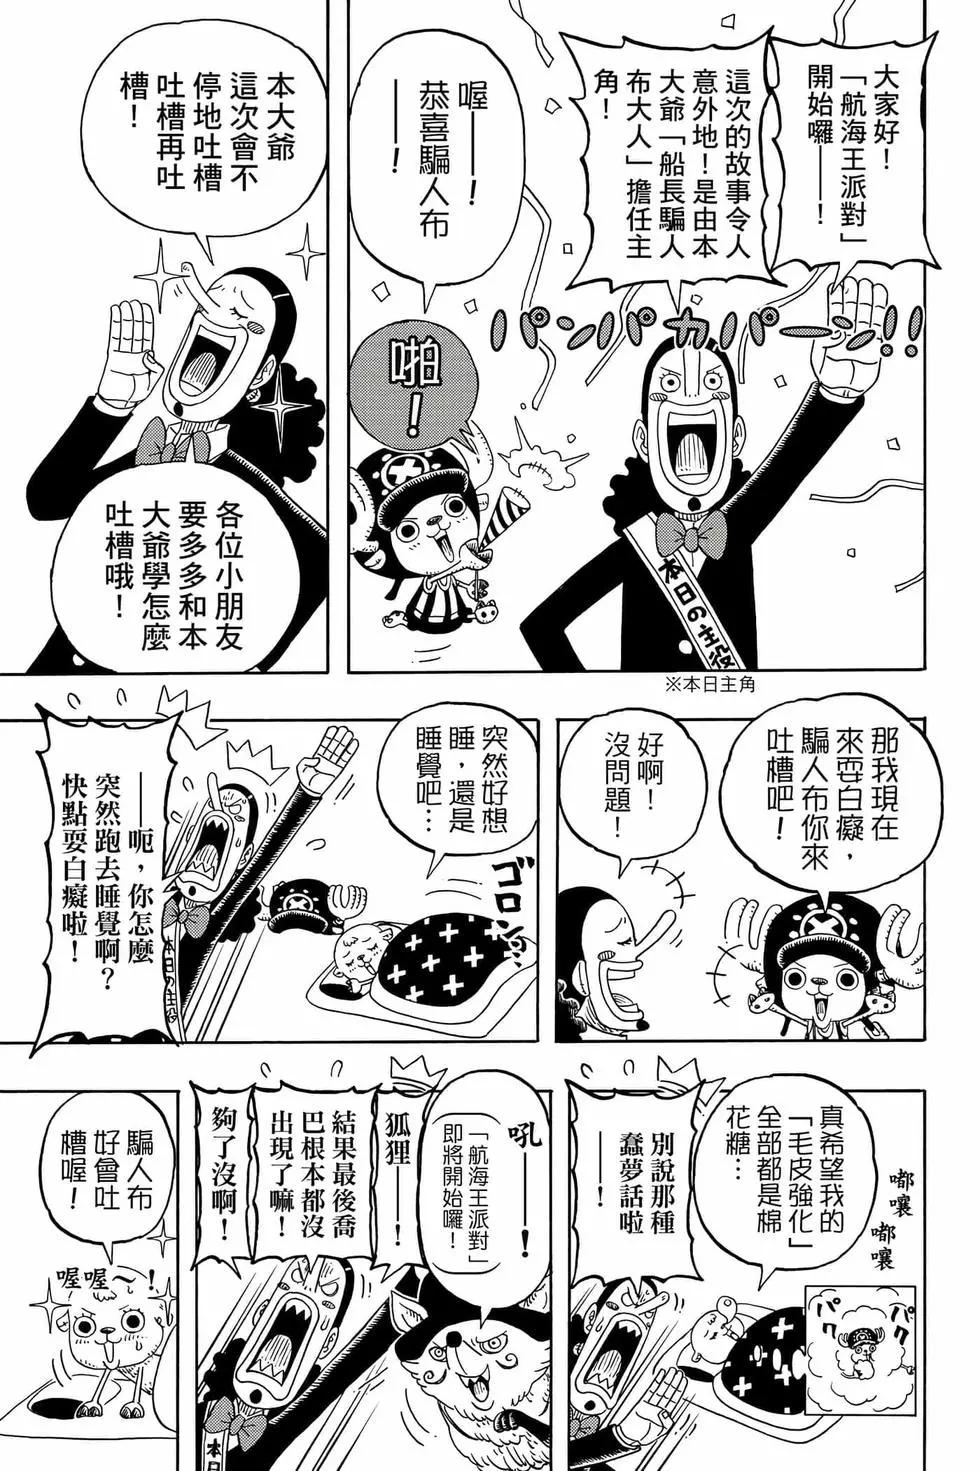 One piece party - 第04卷(1/4) - 8